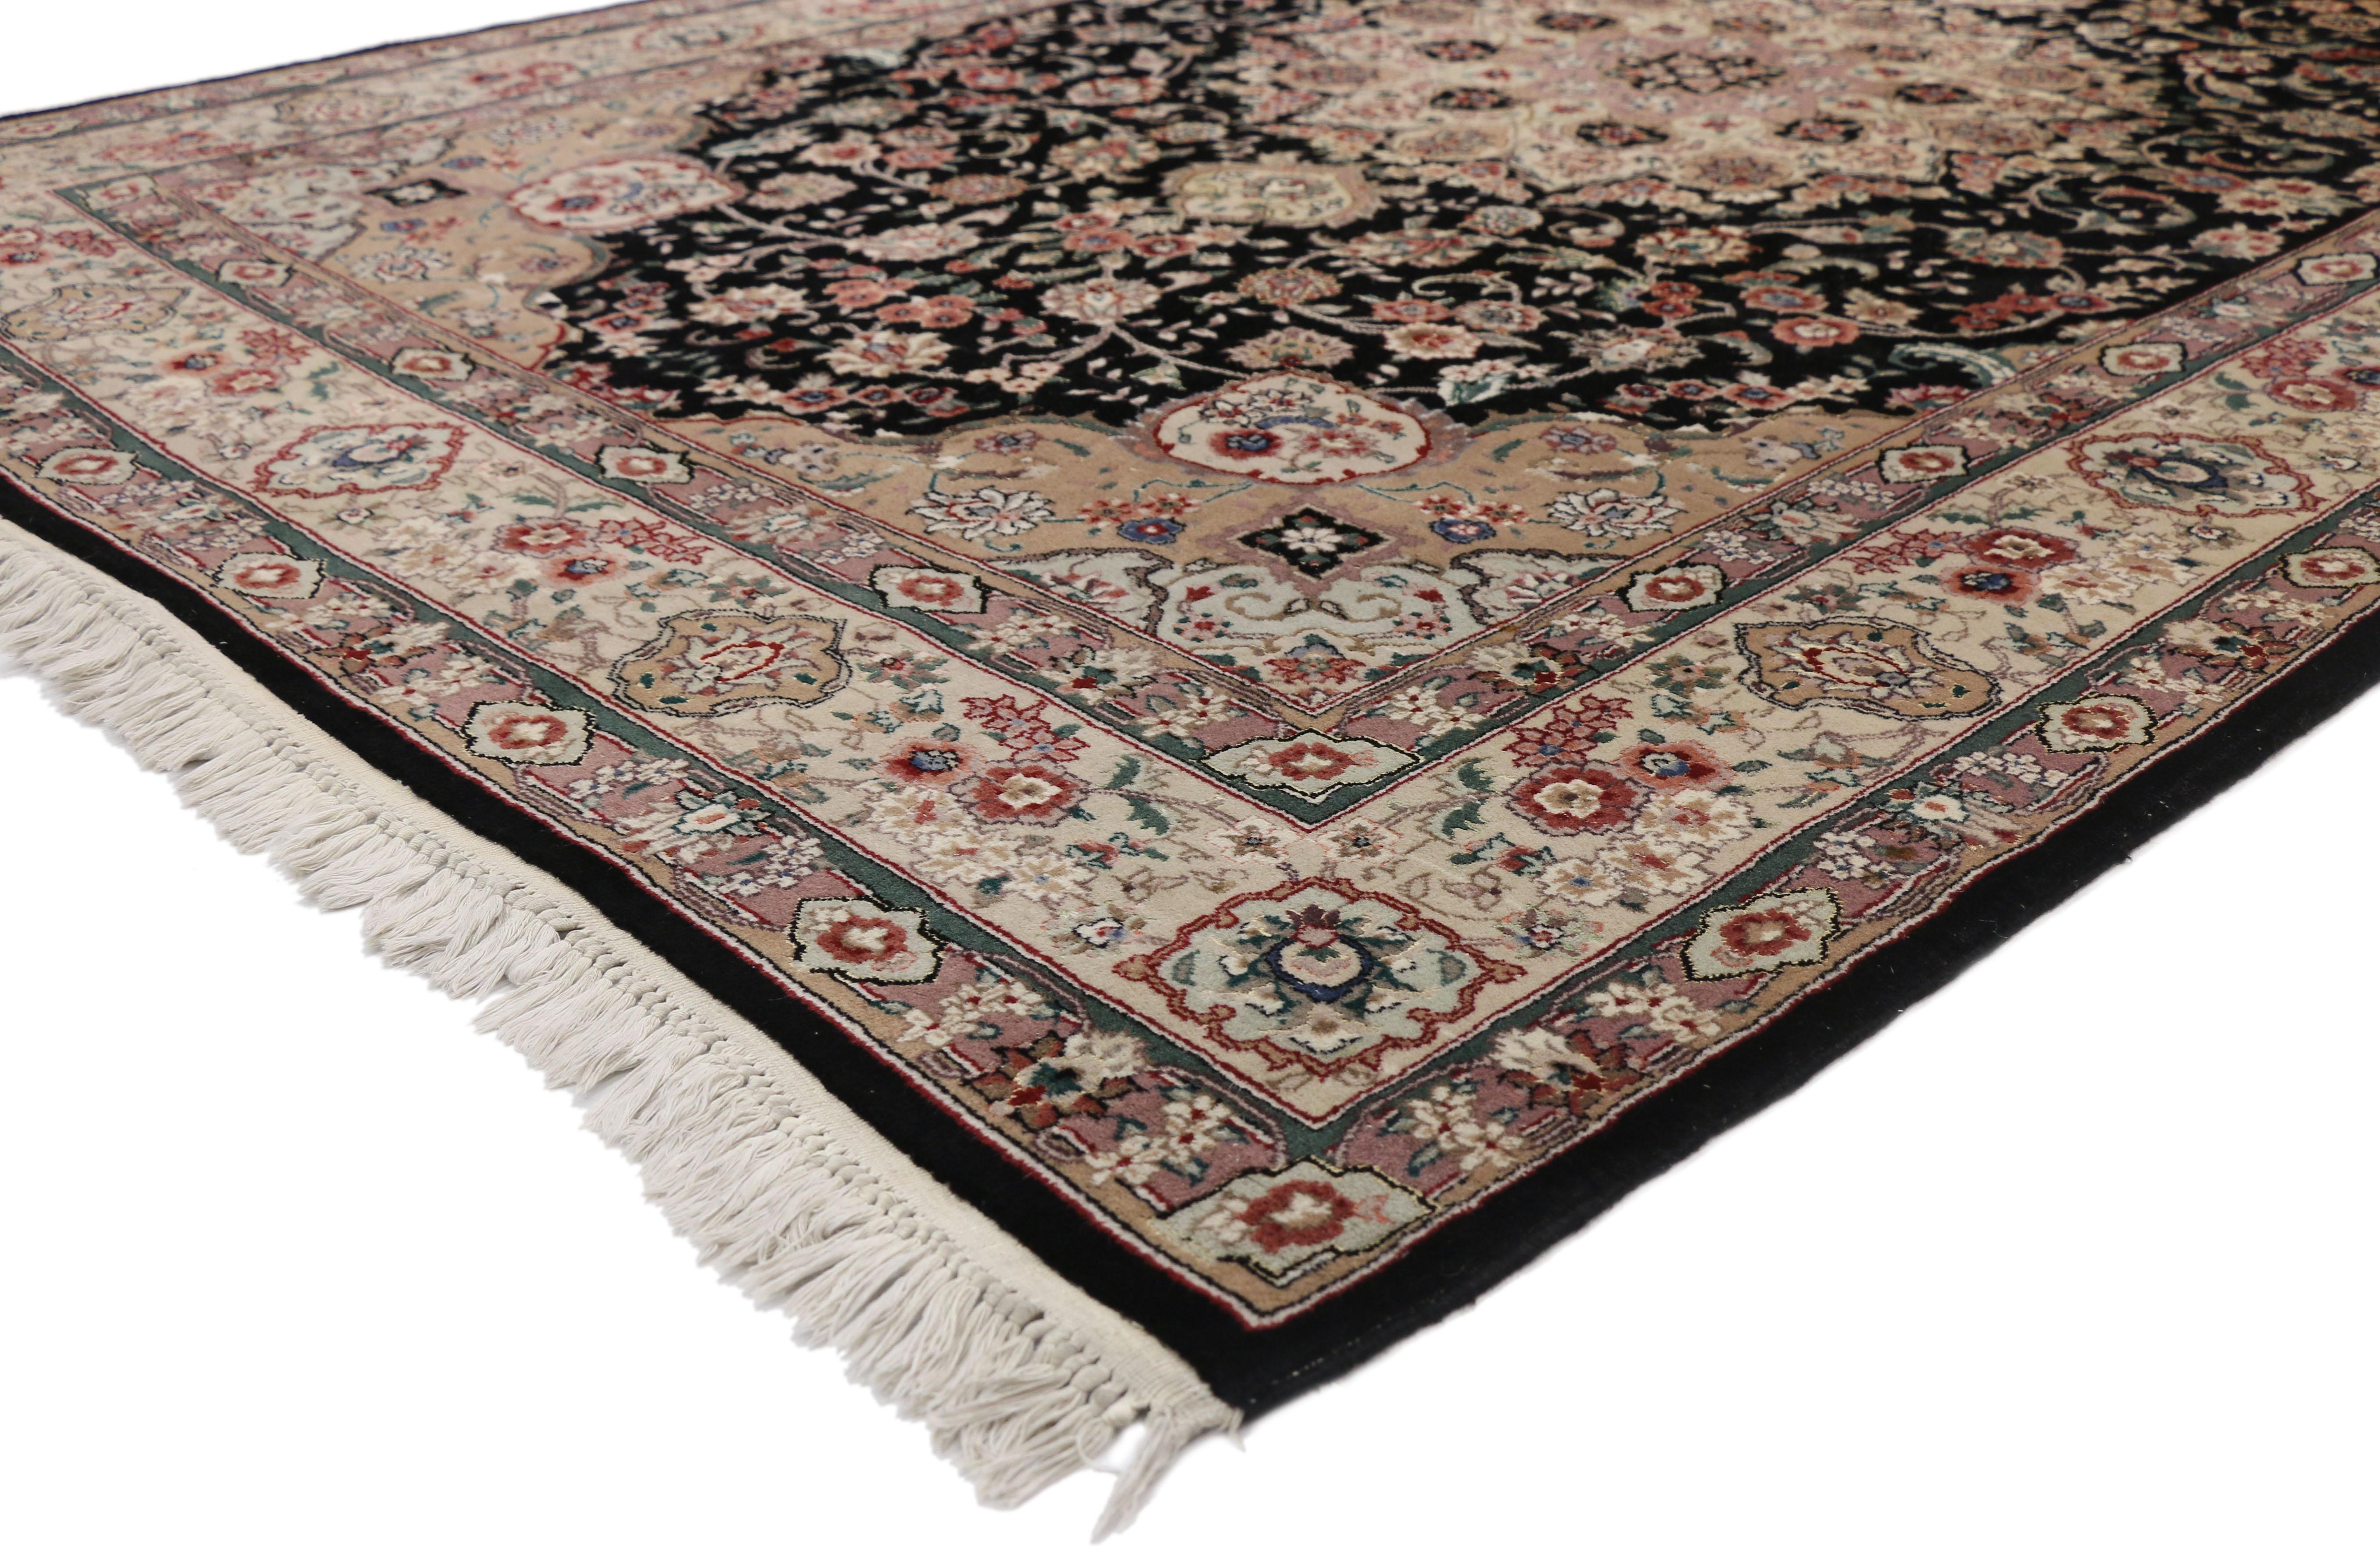 77329, vintage Chinese area rug with Persian Tabriz design and Regency style. Ravishing and refined, this hand knotted wool and silk vintage Chinese Tabriz Persian style rug features a large-scale cusped circular medallion anchored with palmette